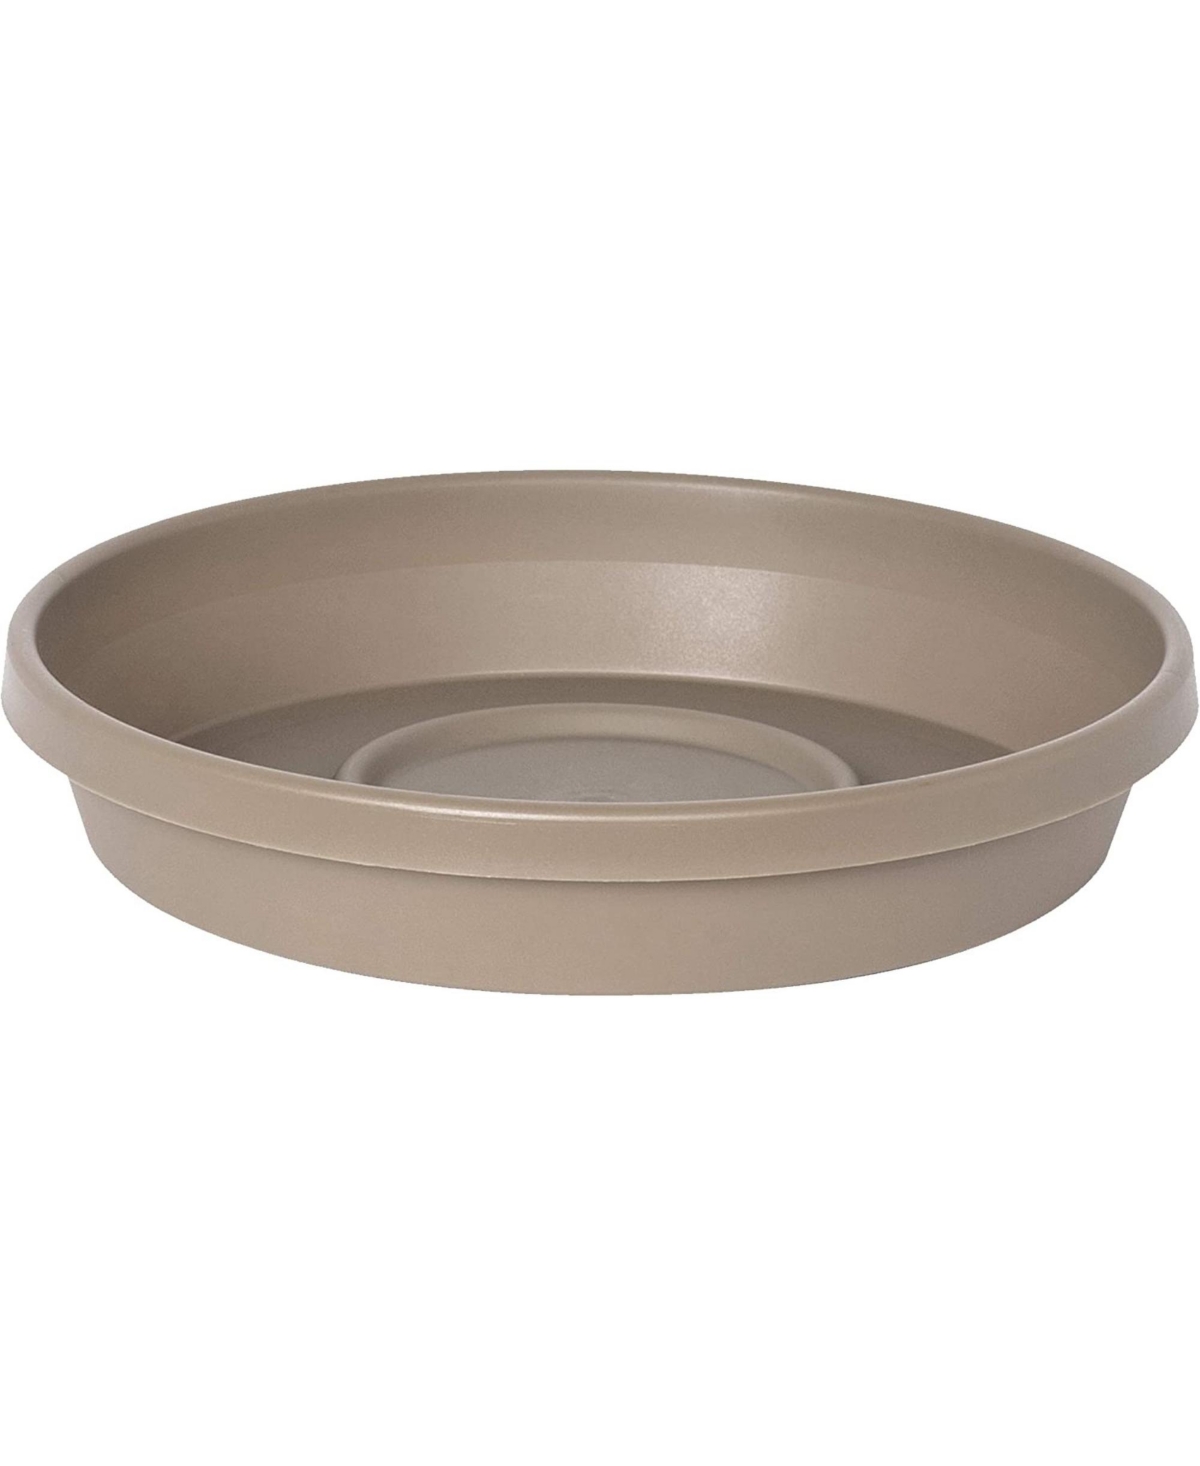 Terra Round Plastic Saucer for Planters, Pebble Stone, 14 inches - Pebble stone